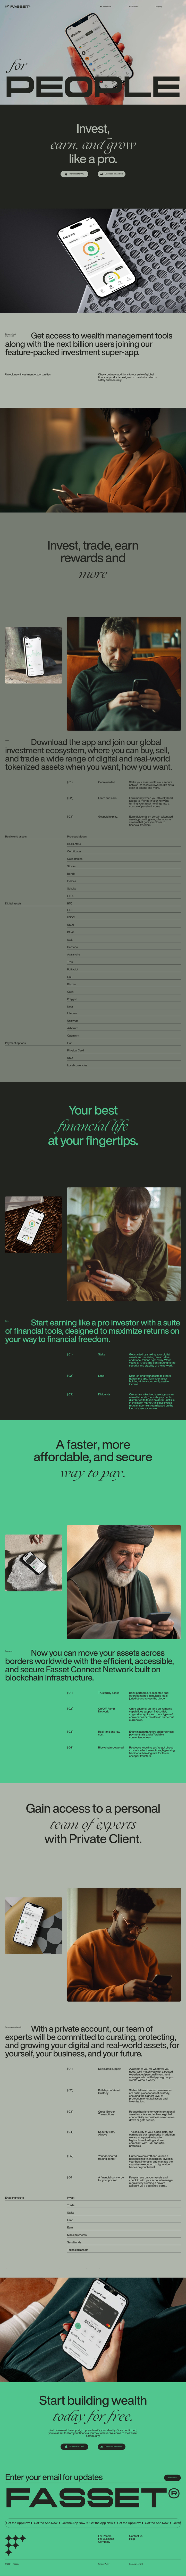 Fasset Landing Page Example: Fasset is an all-in-one financial super app that allows people and businesses to securely invest, earn and make payments from anywhere in the world.